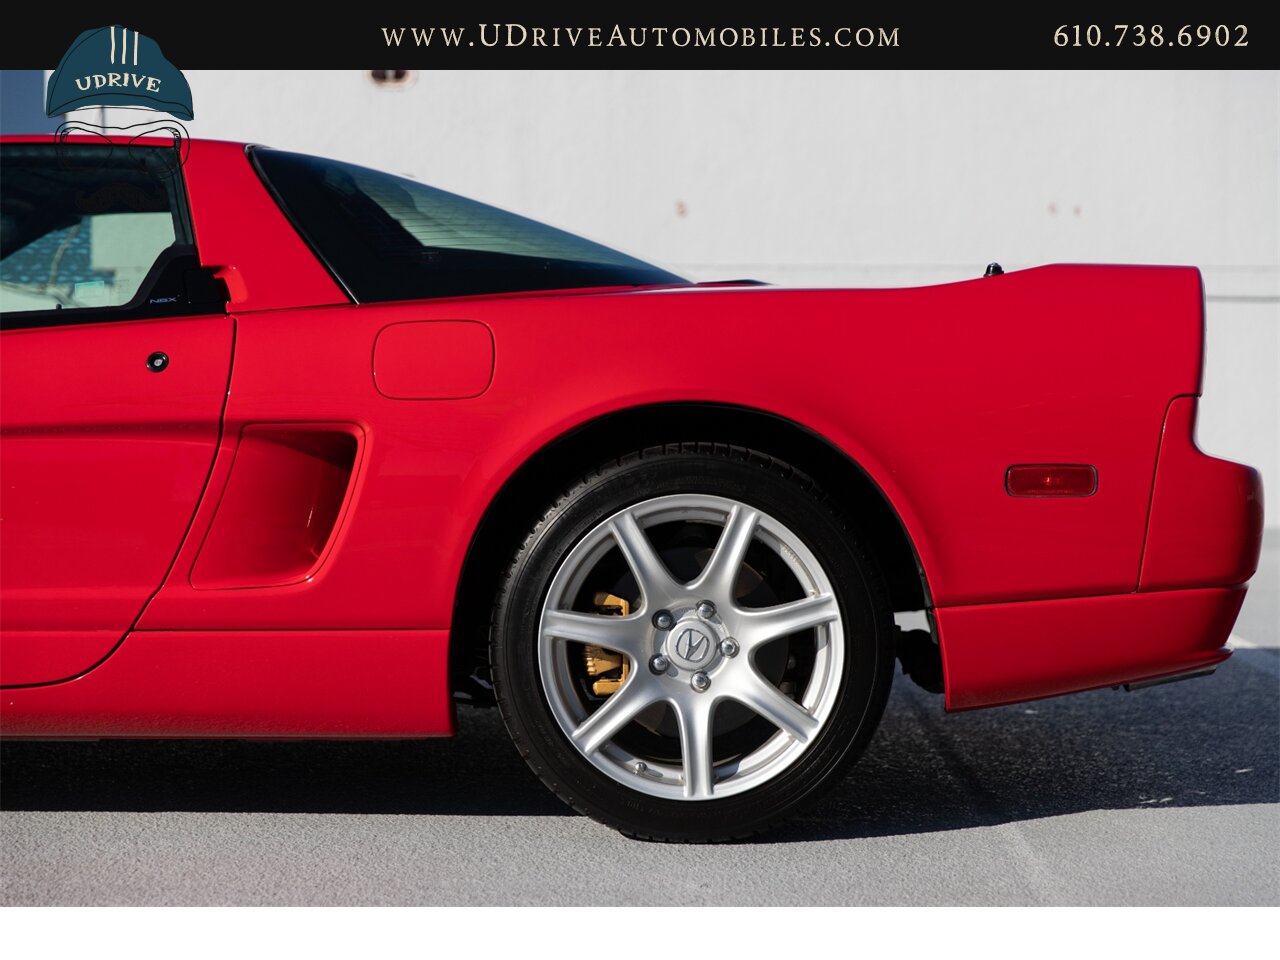 2004 Acura NSX NSX-T 21k mIles Red over Black  Fresh Timing Belt Service - Photo 23 - West Chester, PA 19382